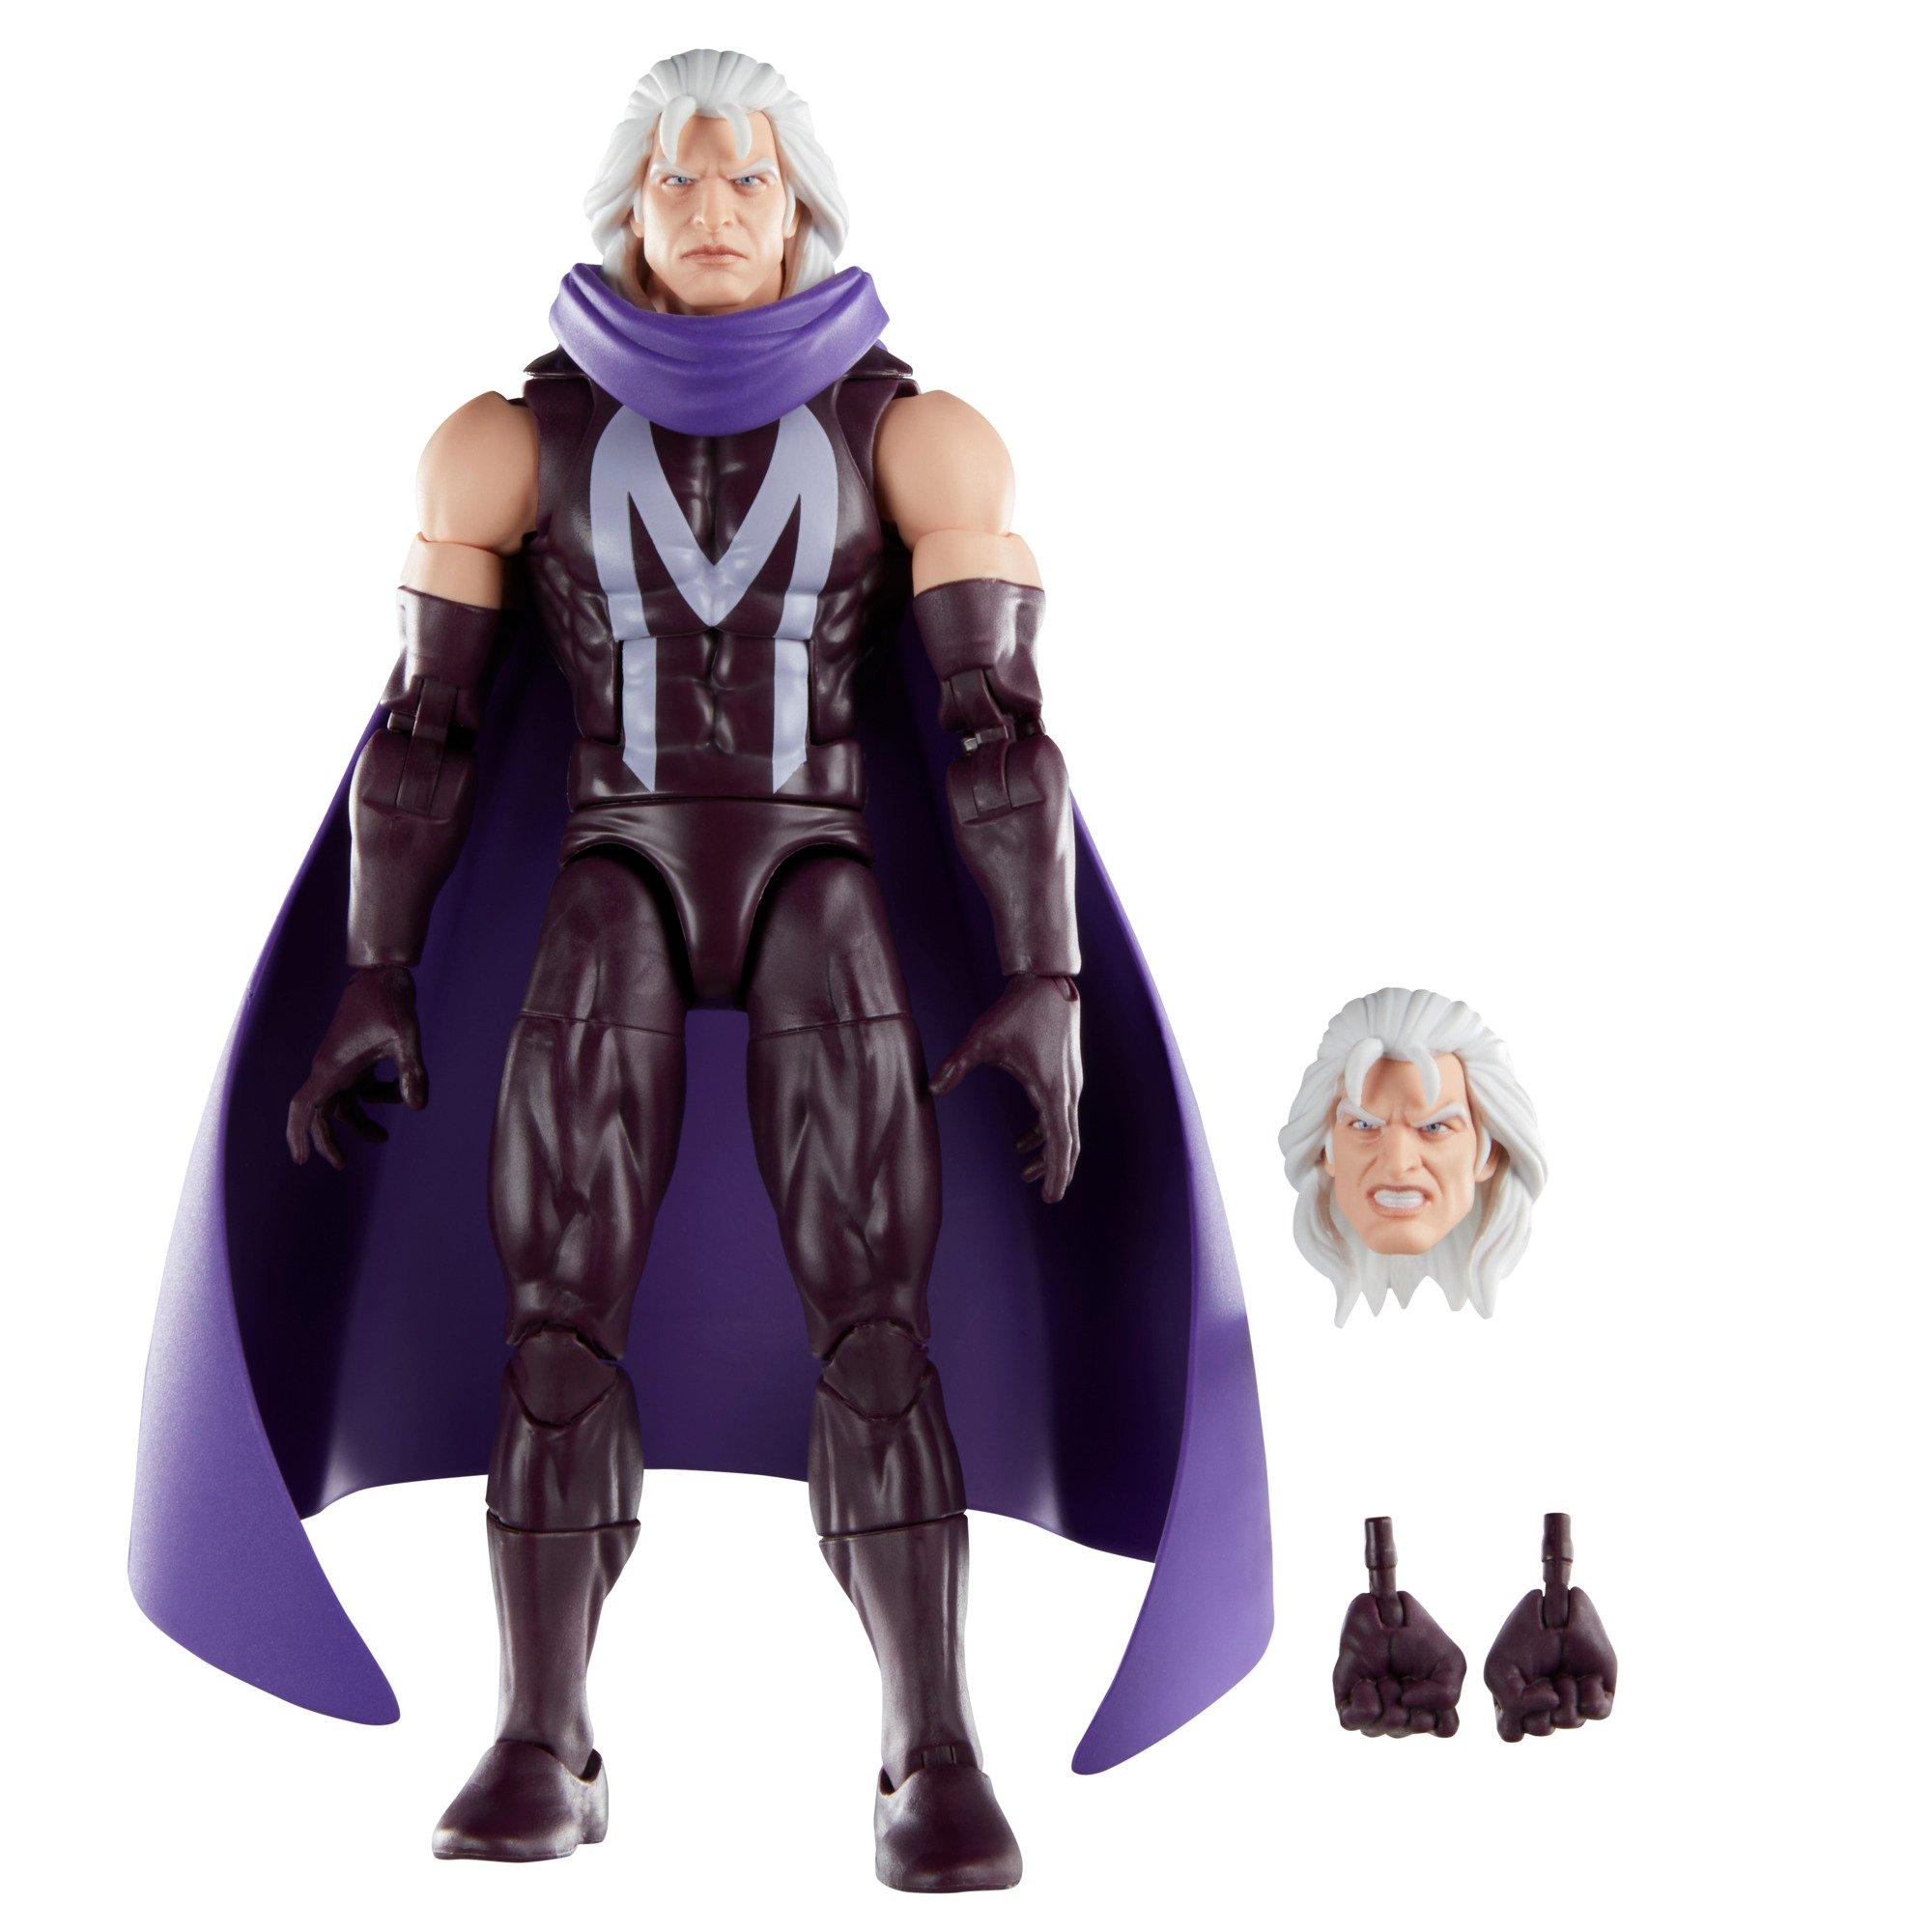 Marvel Legends X-Men Movie 6 Inch Action Figure 2-Pack - Magneto and P